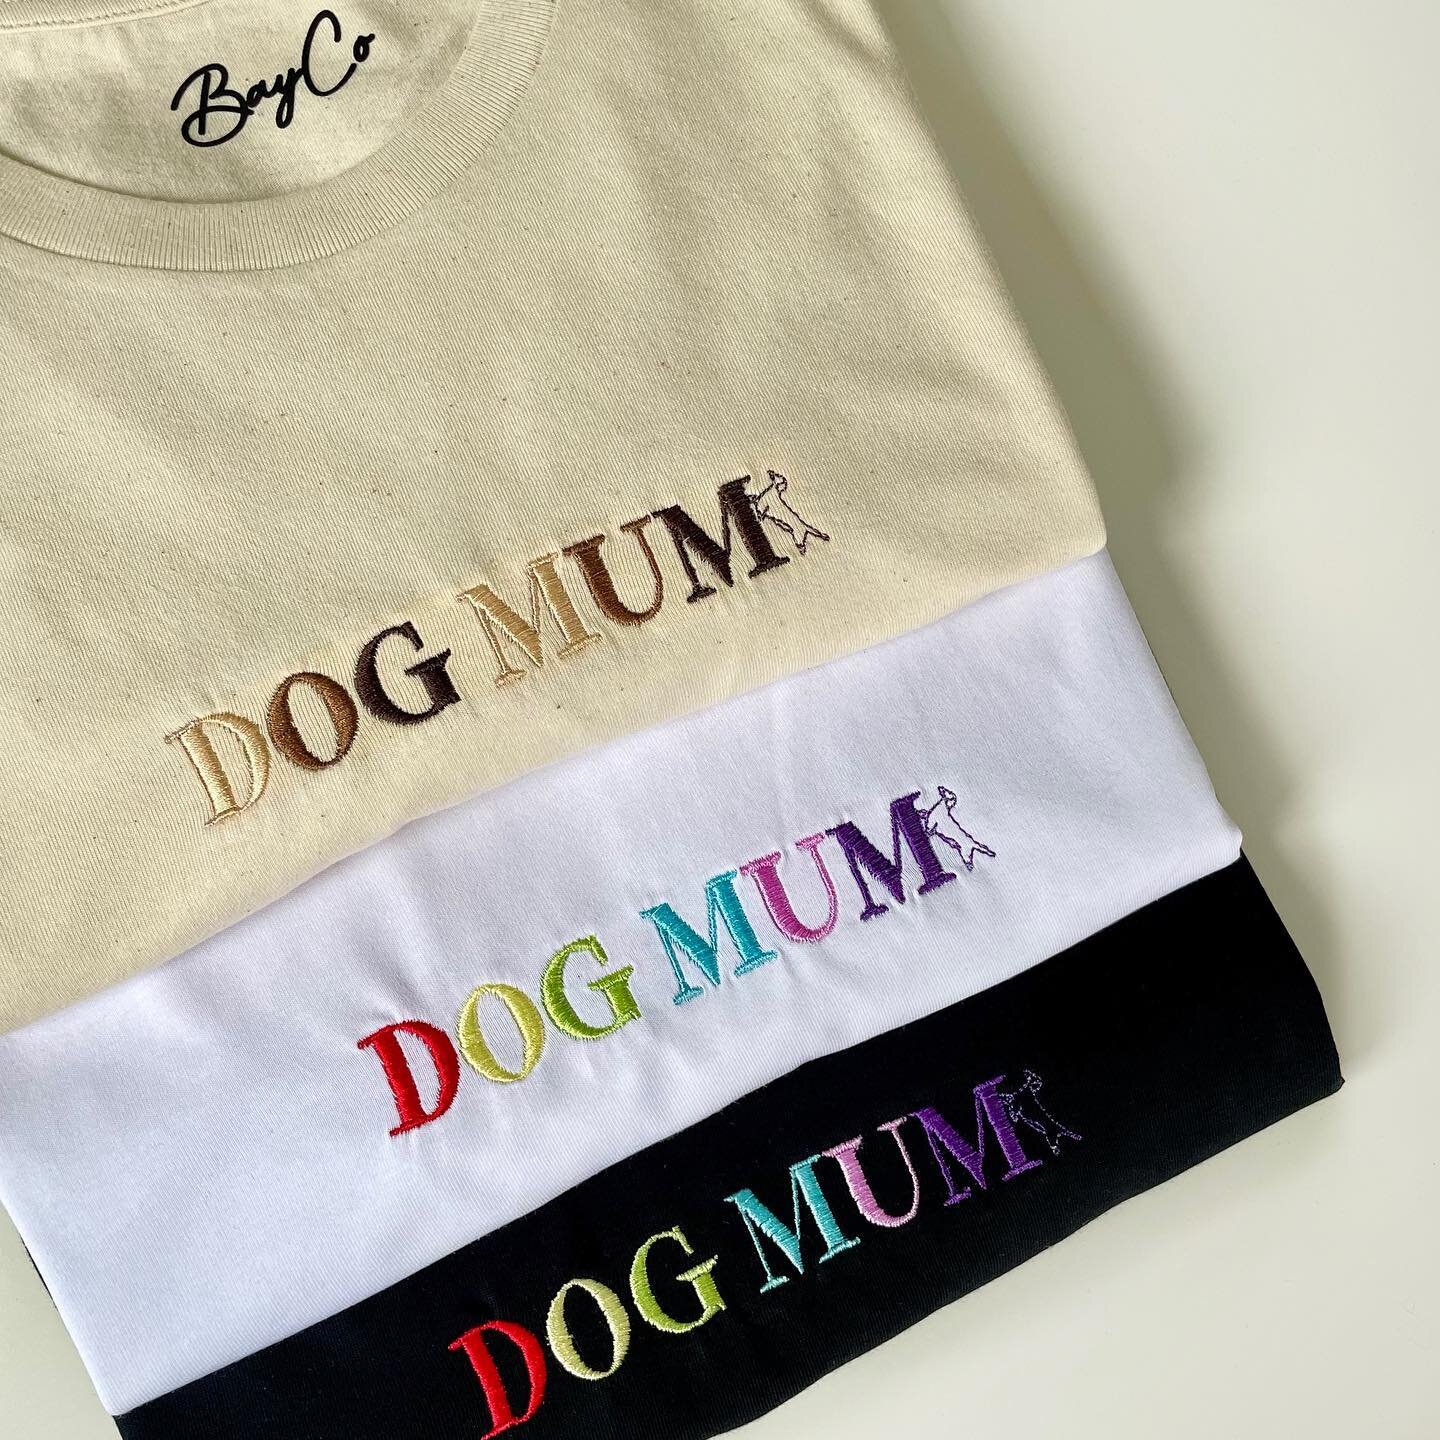 Happy National Dog Mom Day to all the amazing dog moms out there! 🐶🐶

As a small business that loves dogs and art, we know how much your furry friends mean to you. They're not just pets, they're family. 

To celebrate this special day we have creat